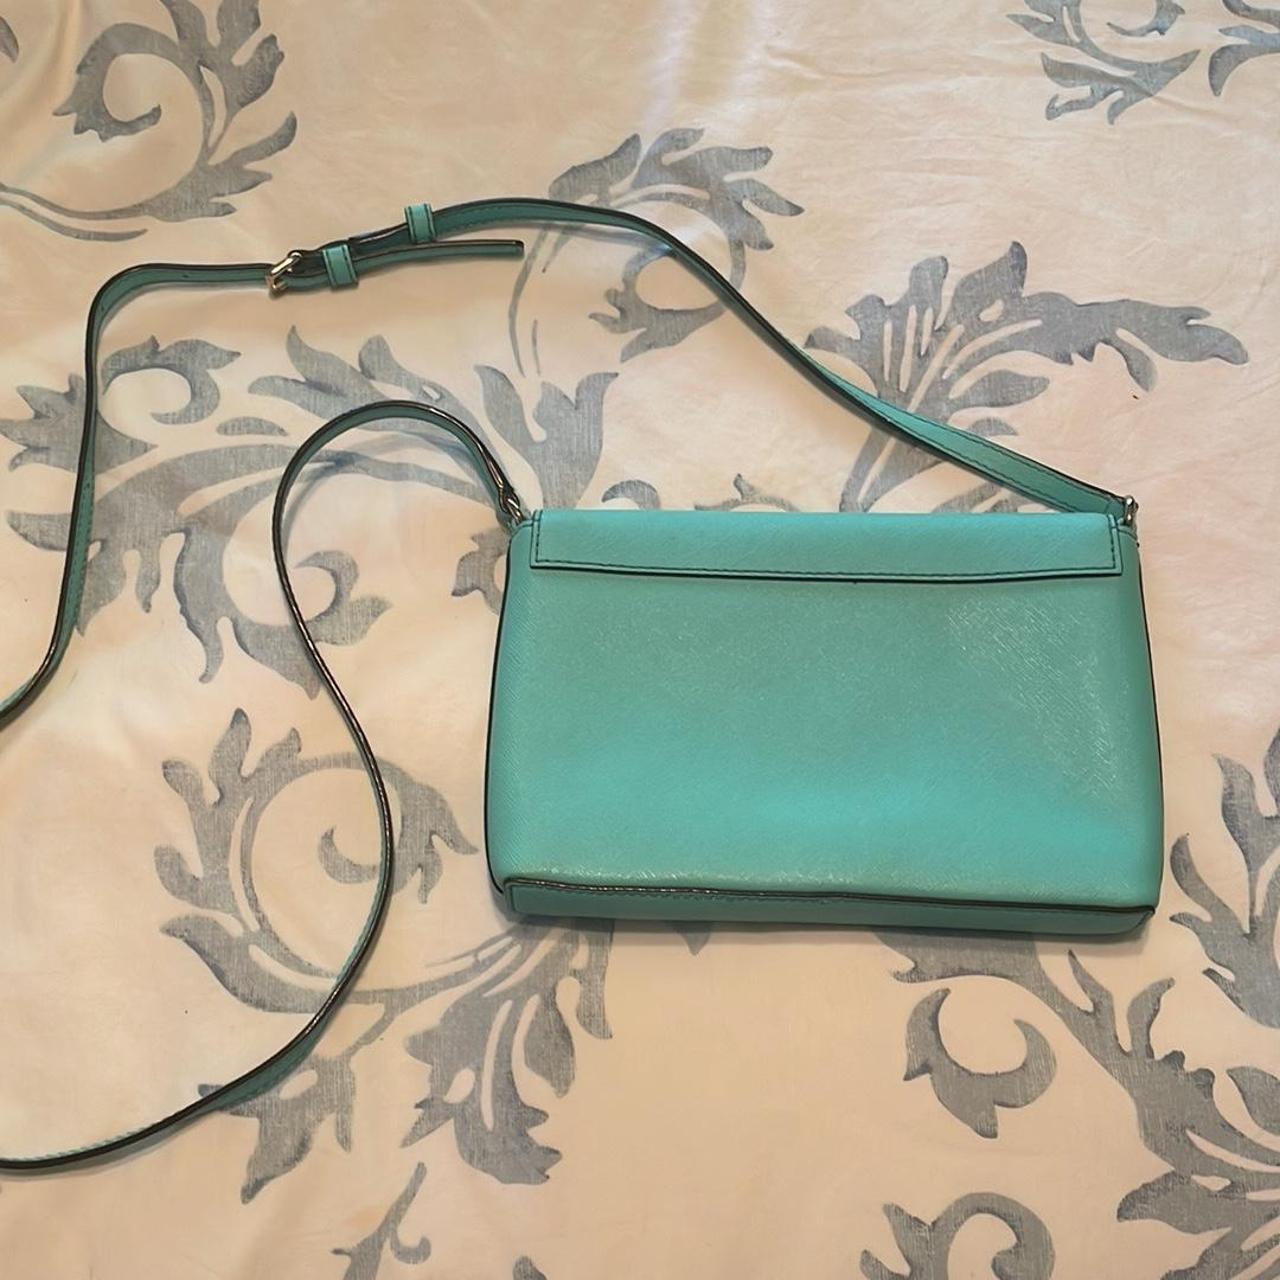 Kate Spade New York Cassy Leather Tote Bag Frosted Spearmint - Walmart.com